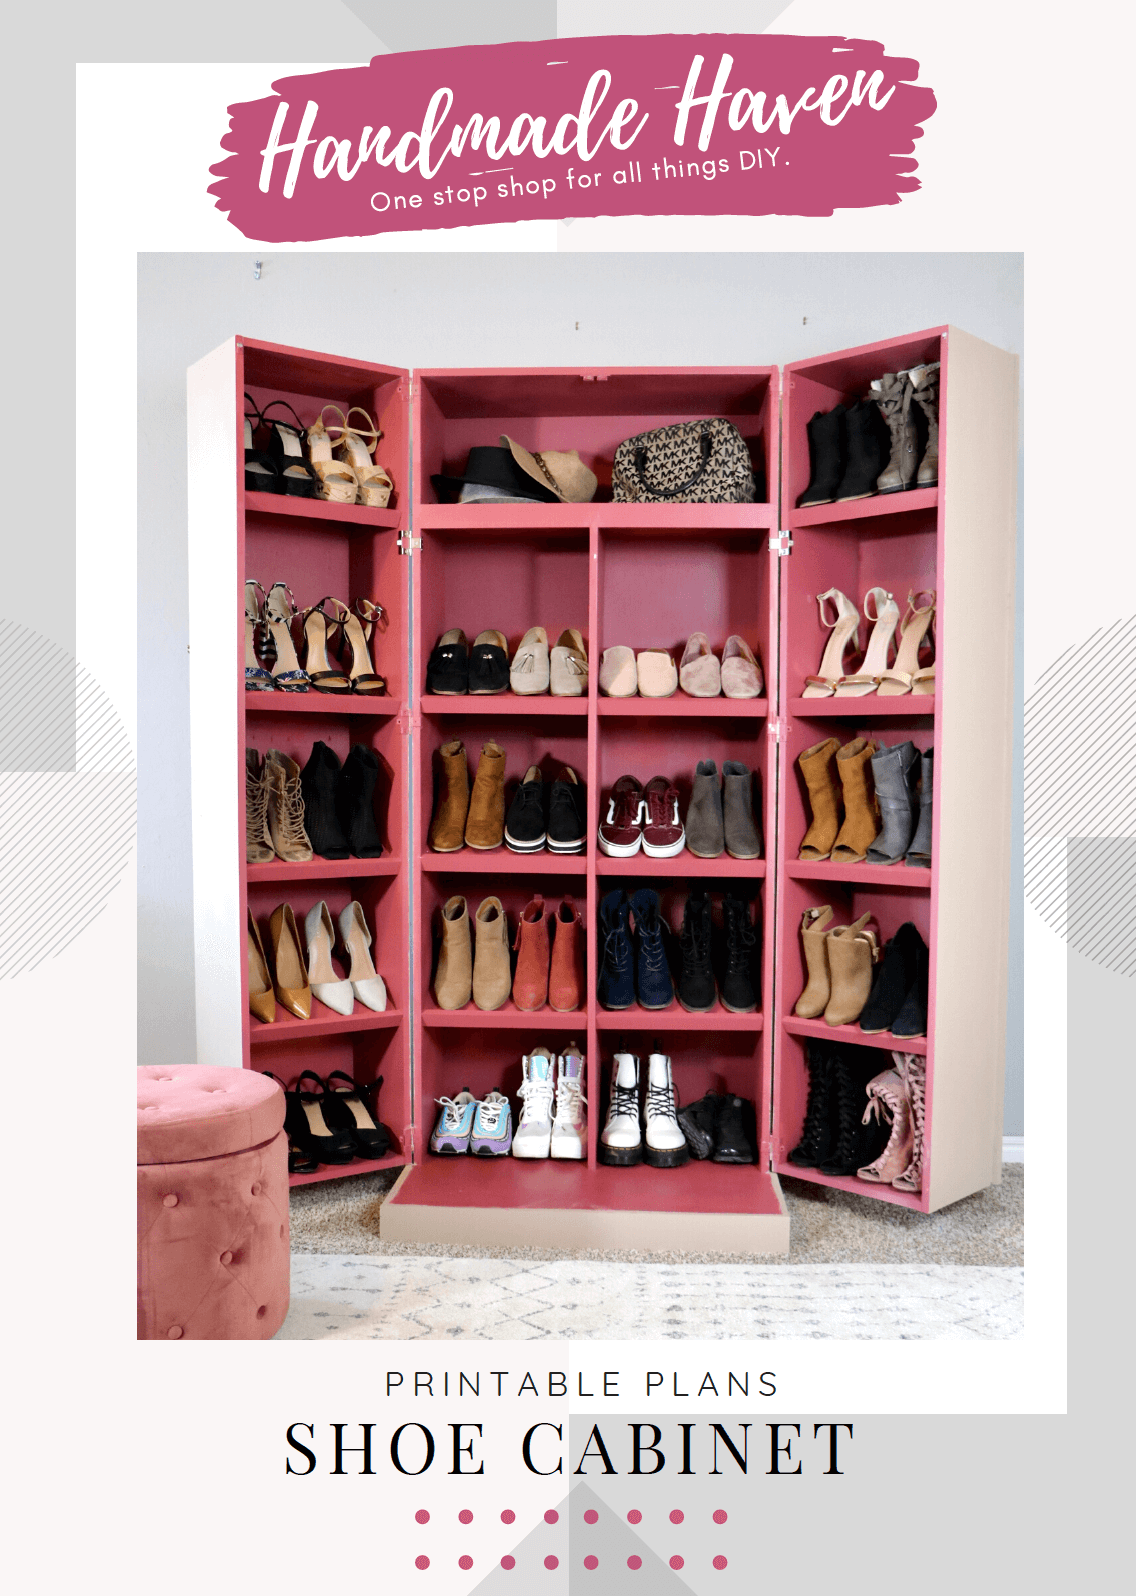 https://cdn.shopify.com/s/files/1/1541/7533/products/Shoe_Cabinet_Printable_Plans.png?v=1581103192